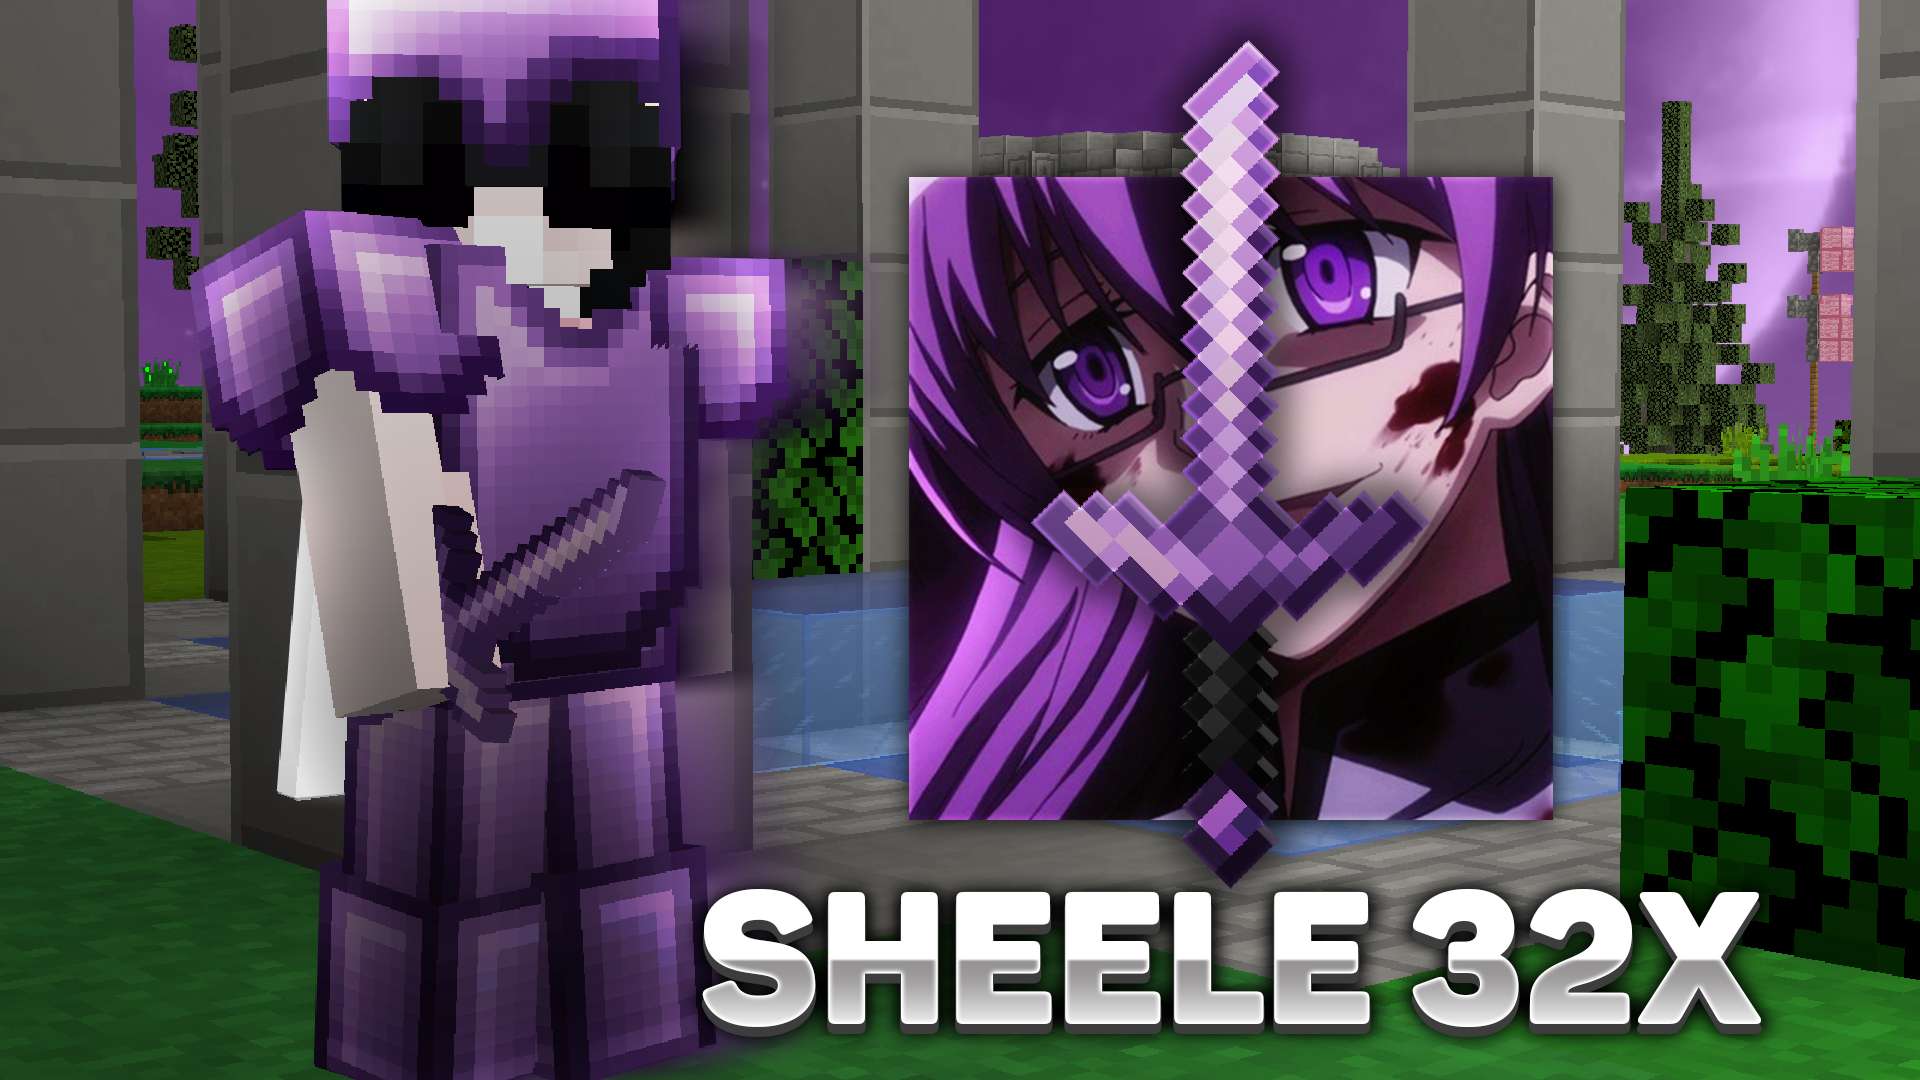 Sheele 32x by barbei on PvPRP